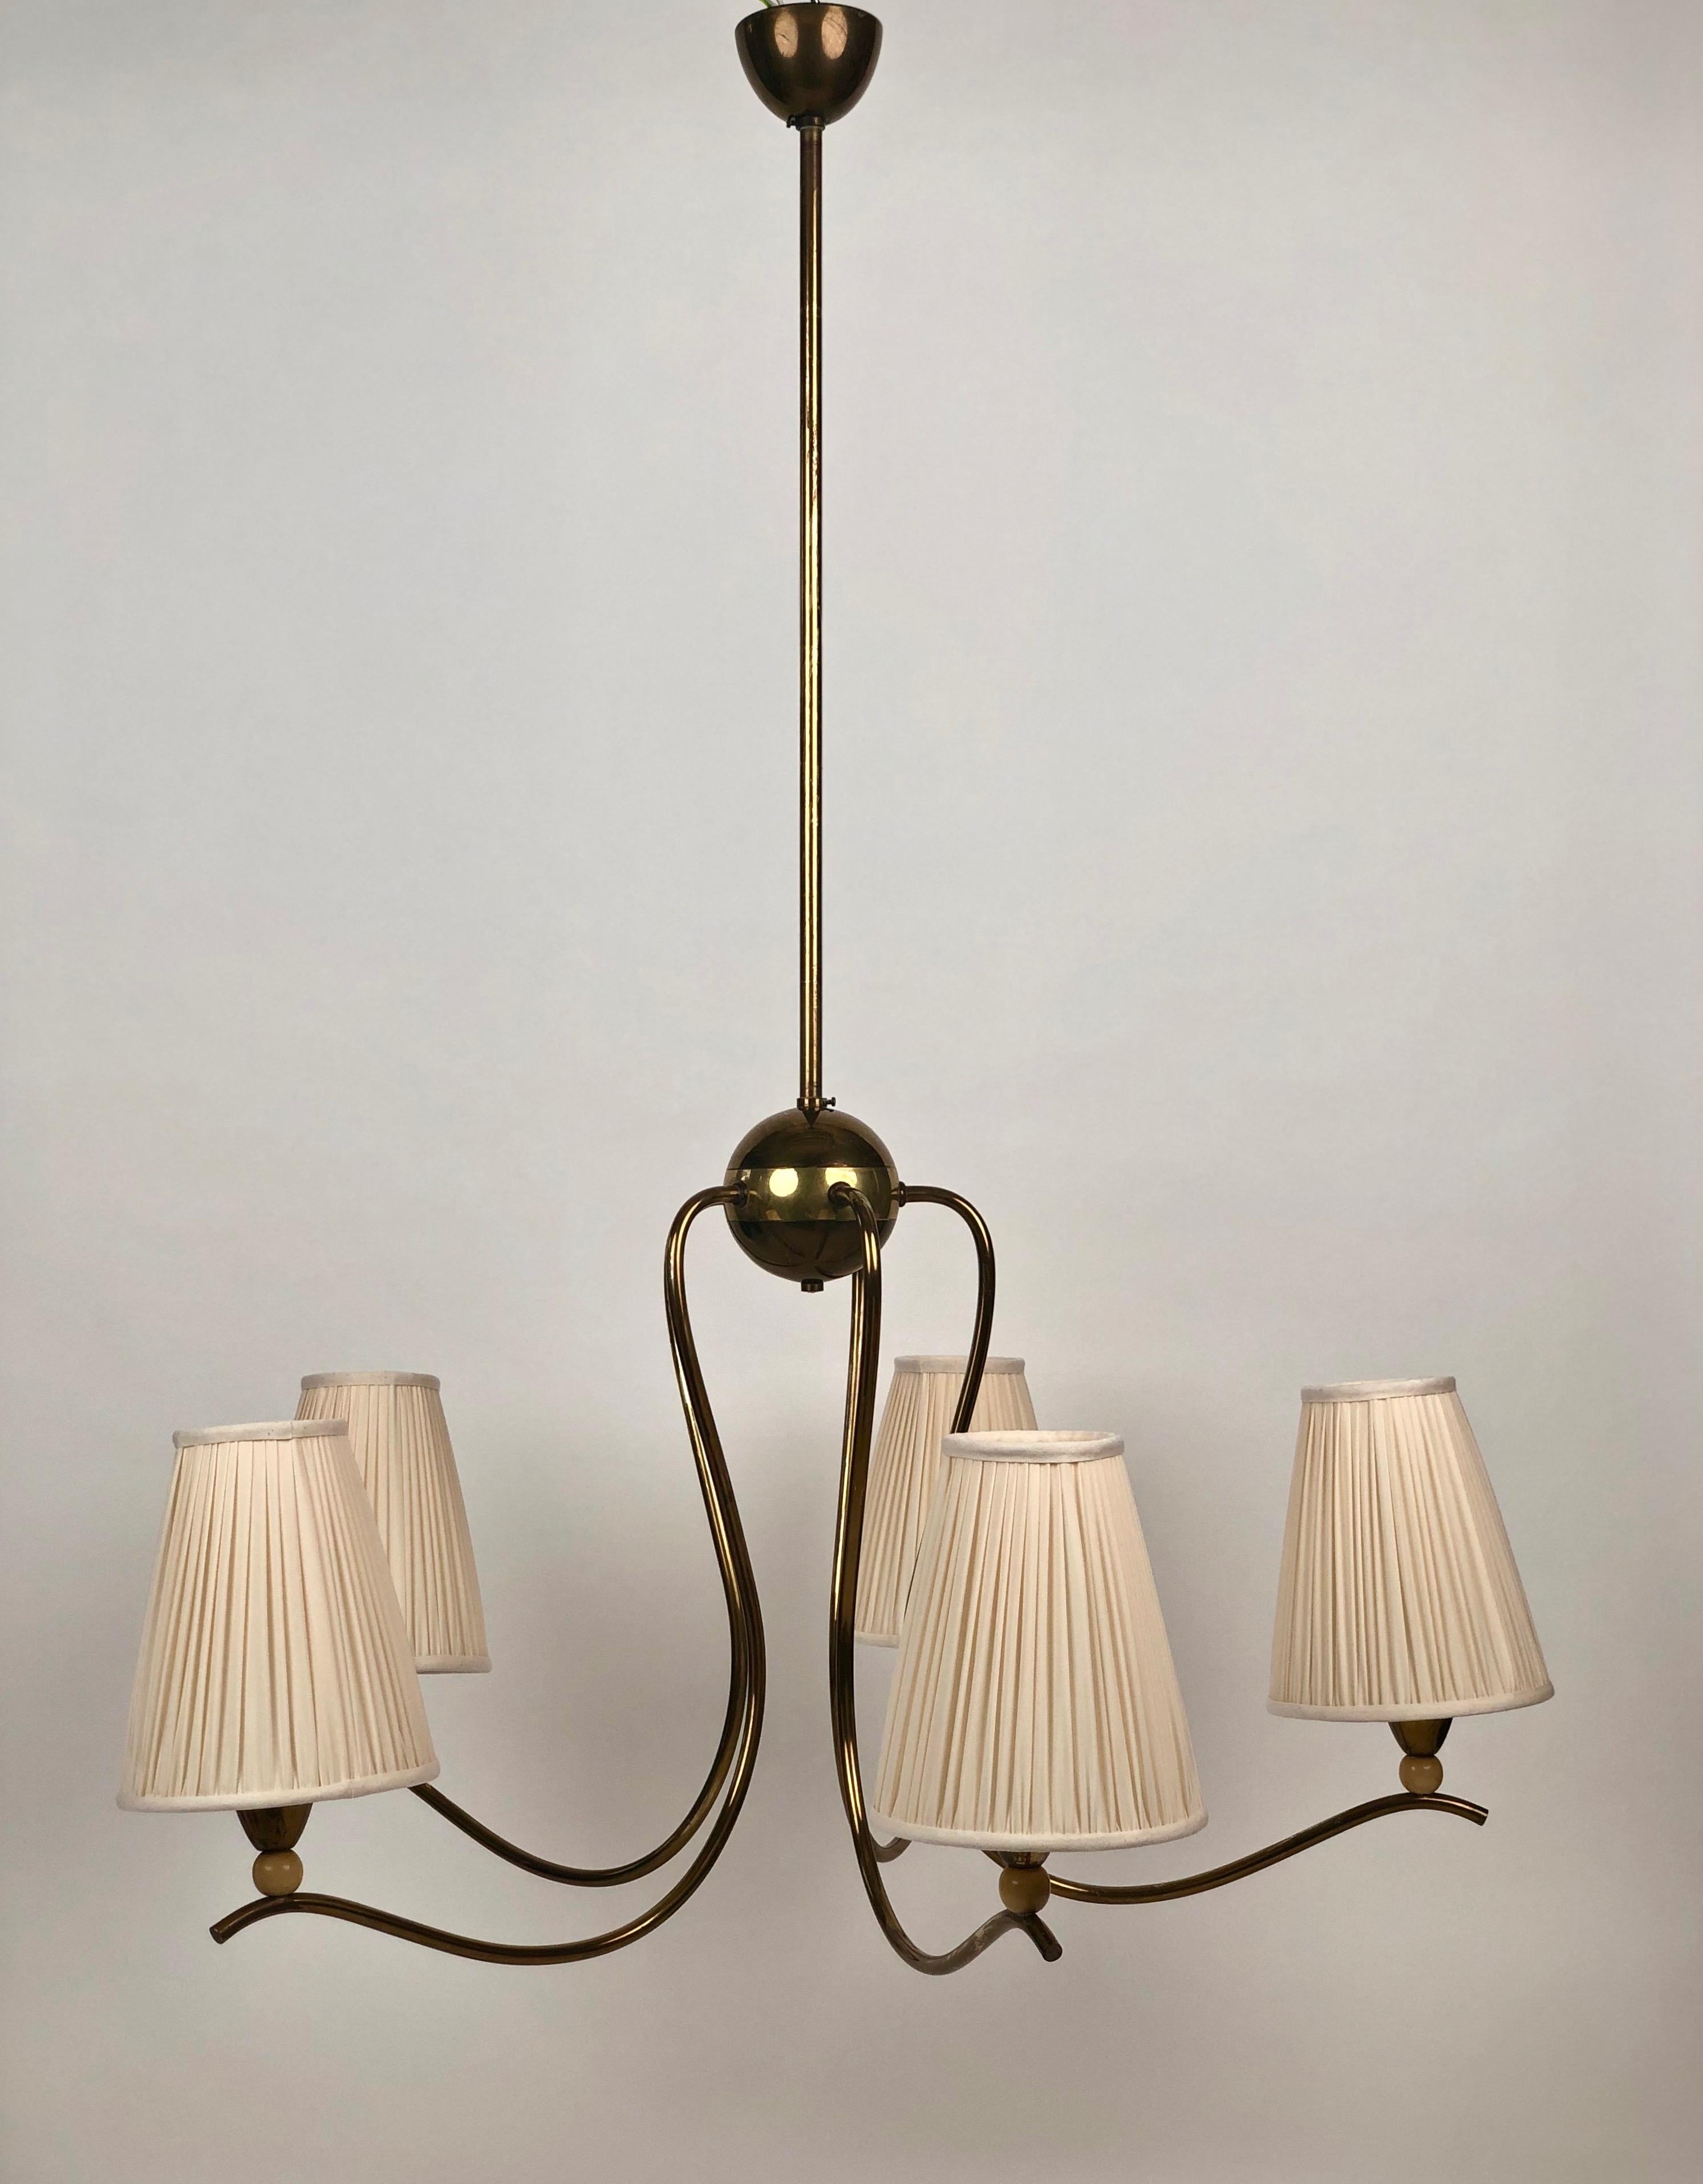 Austrian Five Arms Chandelier in Brass & Wood with Silk Shades from Josef Frank, Austria